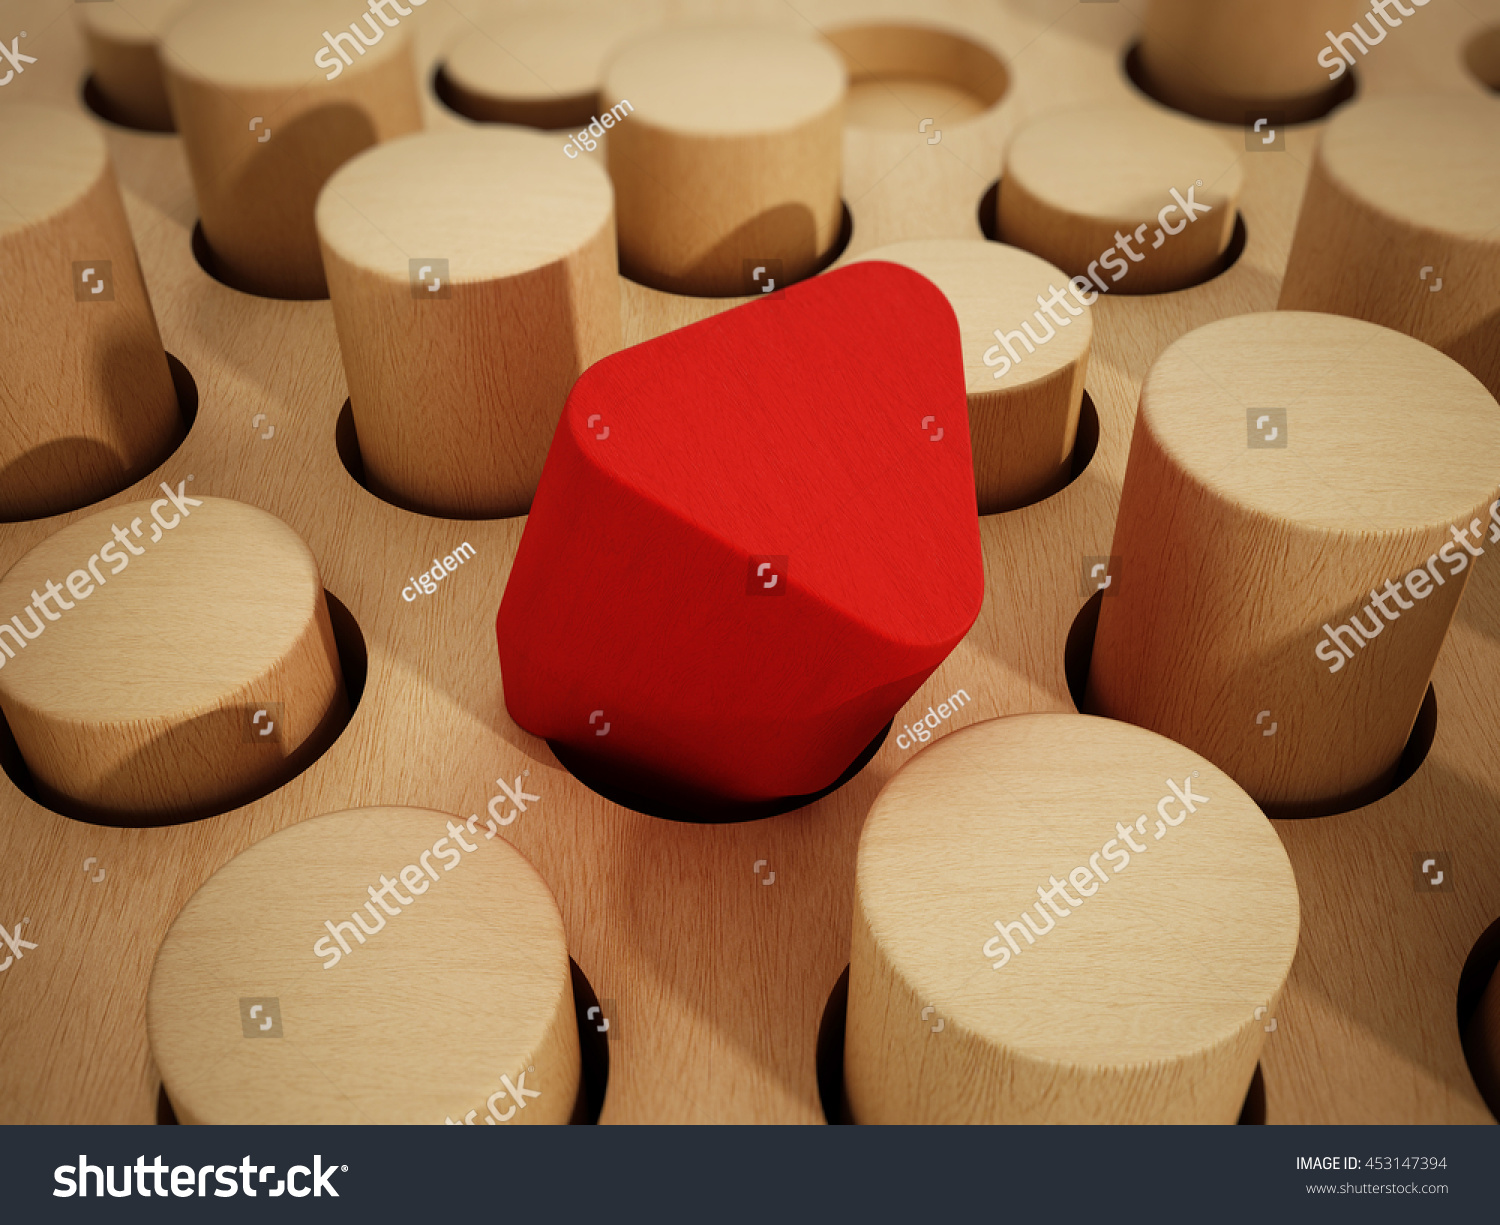 Red prism wooden block standing out among wooden cylinders. 3D illustration.